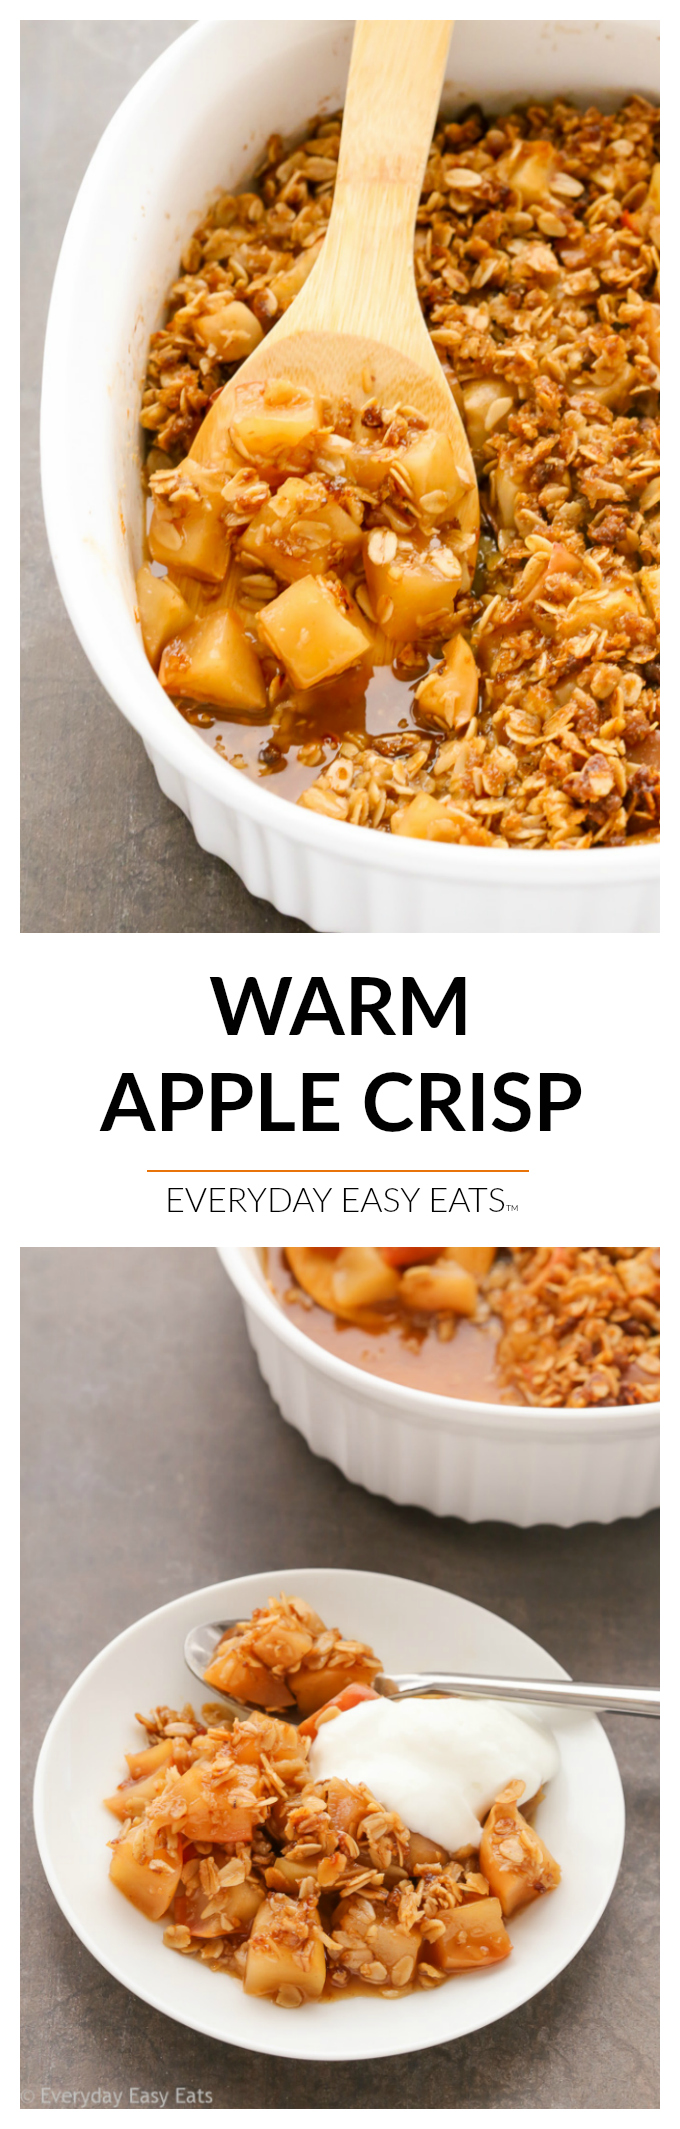 This Easy Gluten-Free Apple Crisp recipe is made with tender, juicy apples under a crunchy, flourless brown sugar-oat topping. The best apple crisp recipe ever!| harrisonpages.com